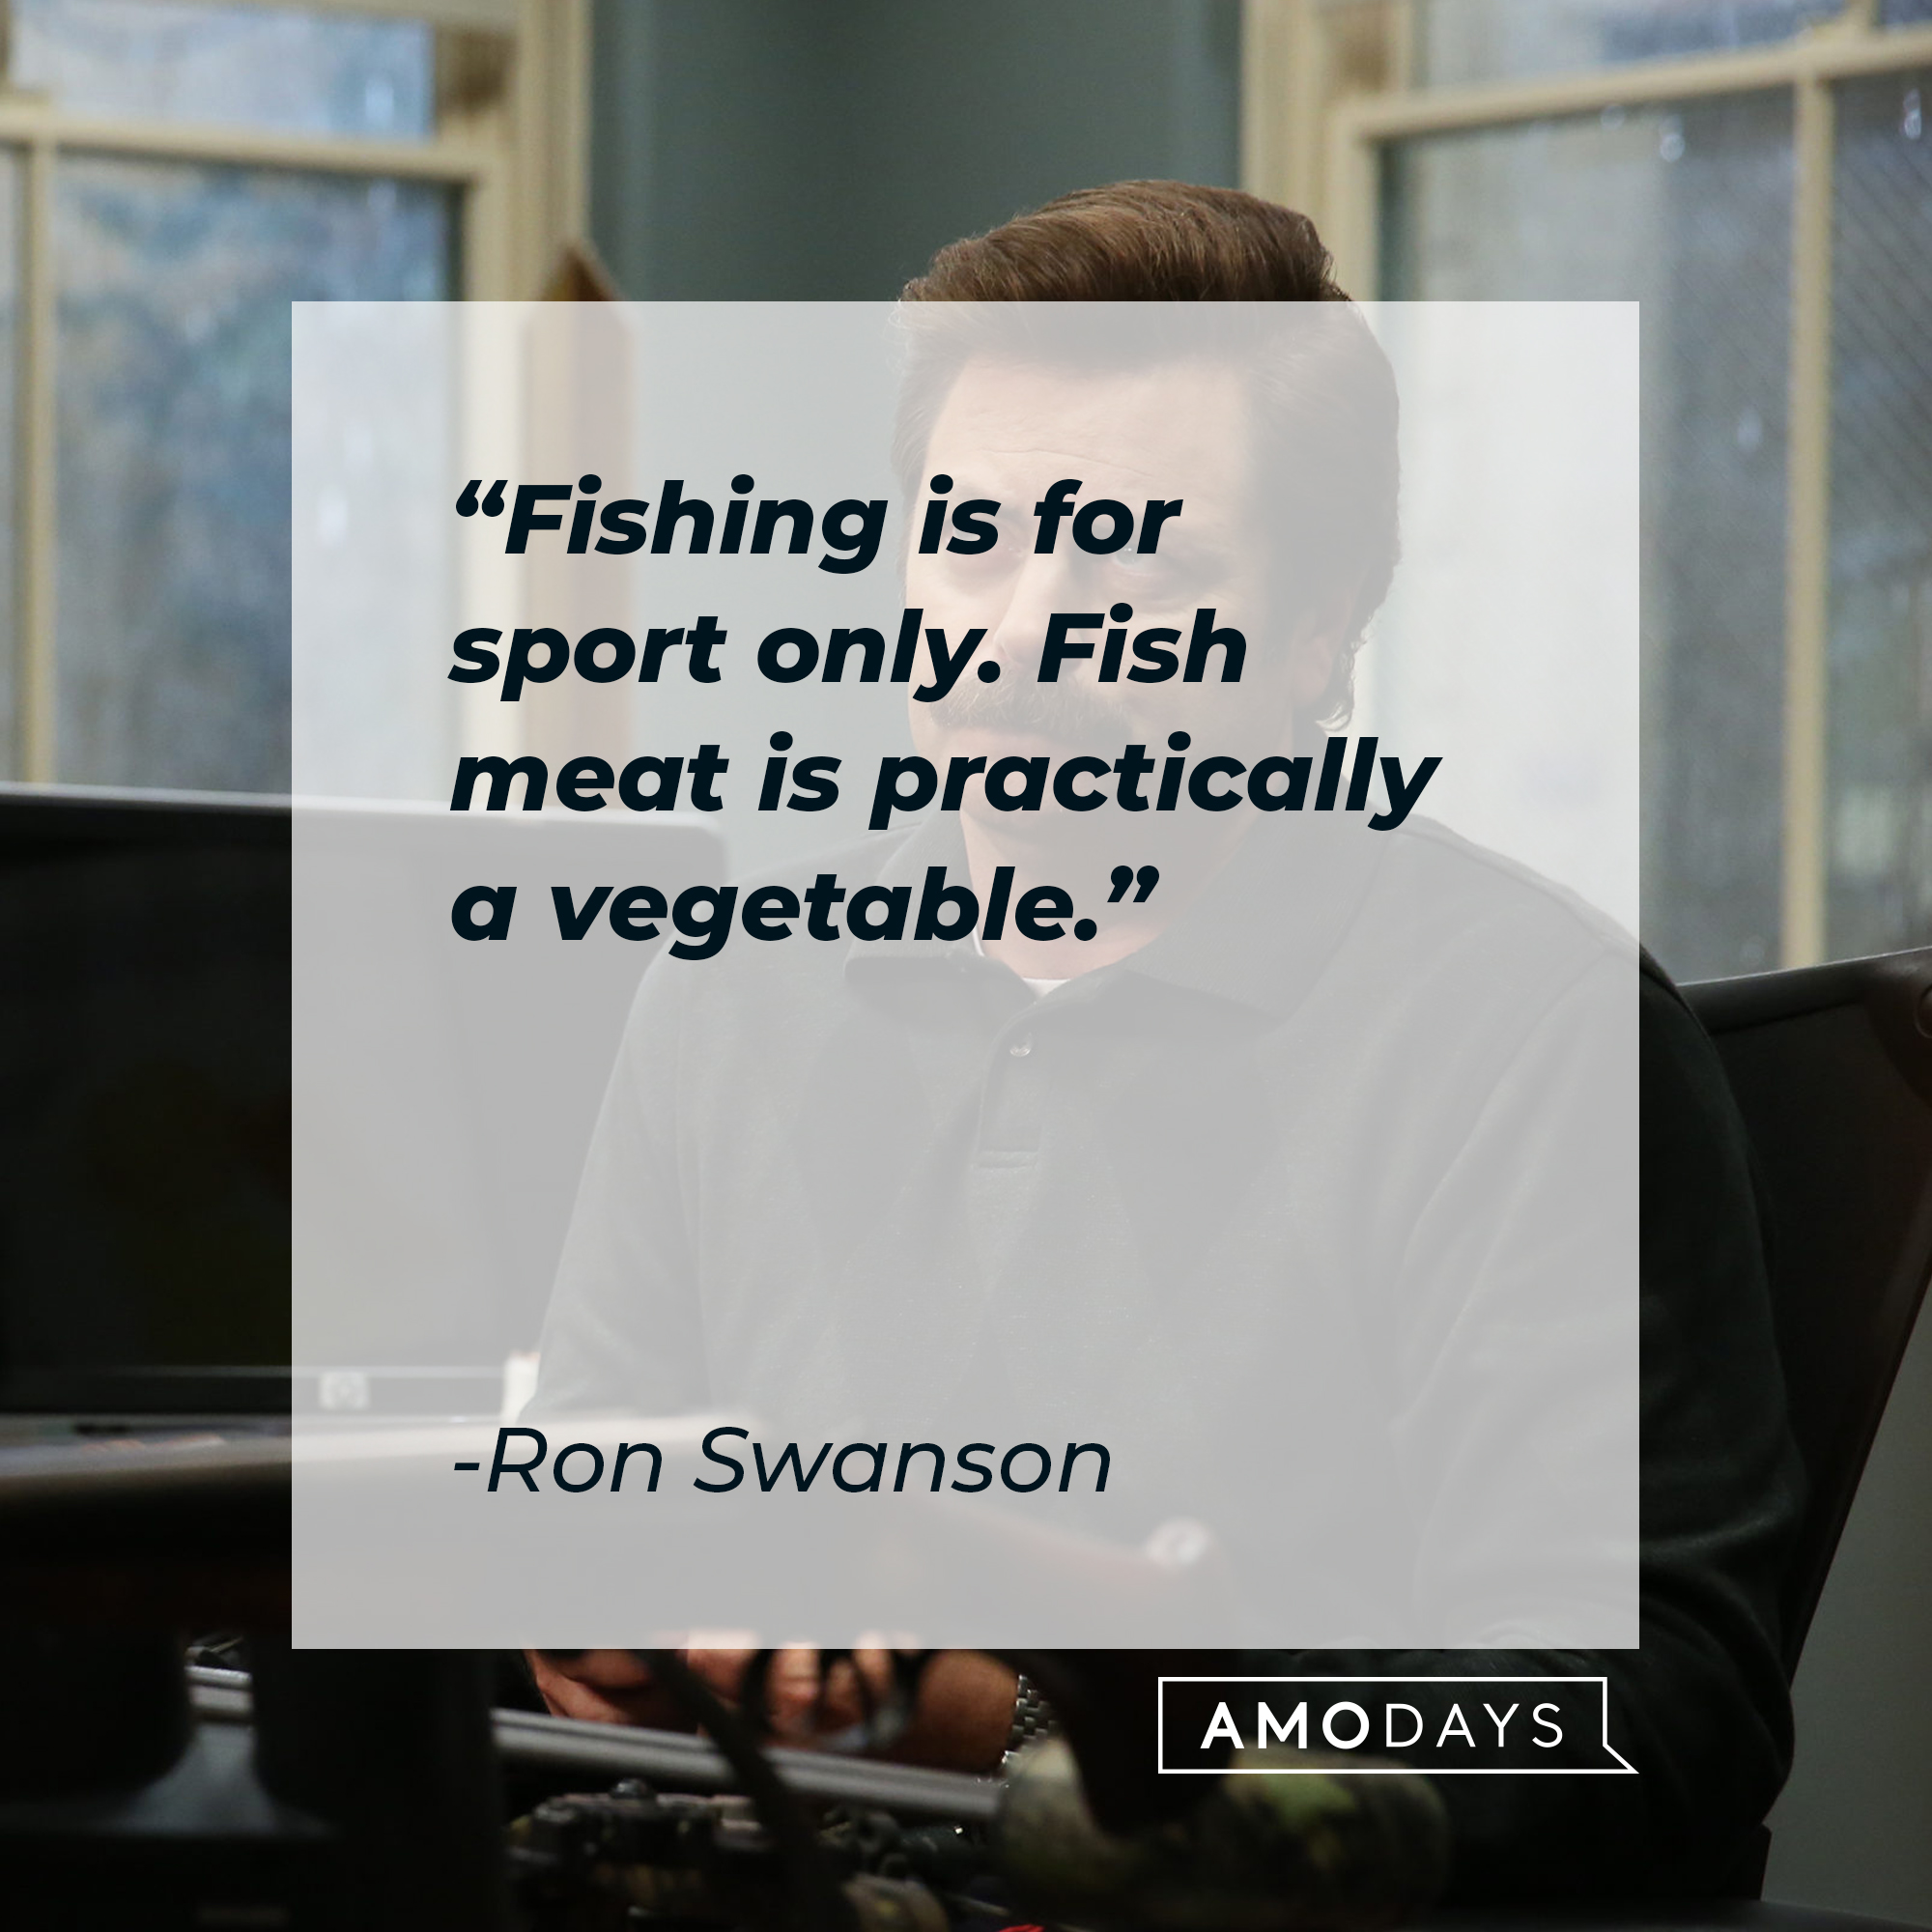 Ron Swanson’s quote: "Fishing is for sport only. Fish meat is practically a vegetable." | Image: Facebook.com/parksandrecreation